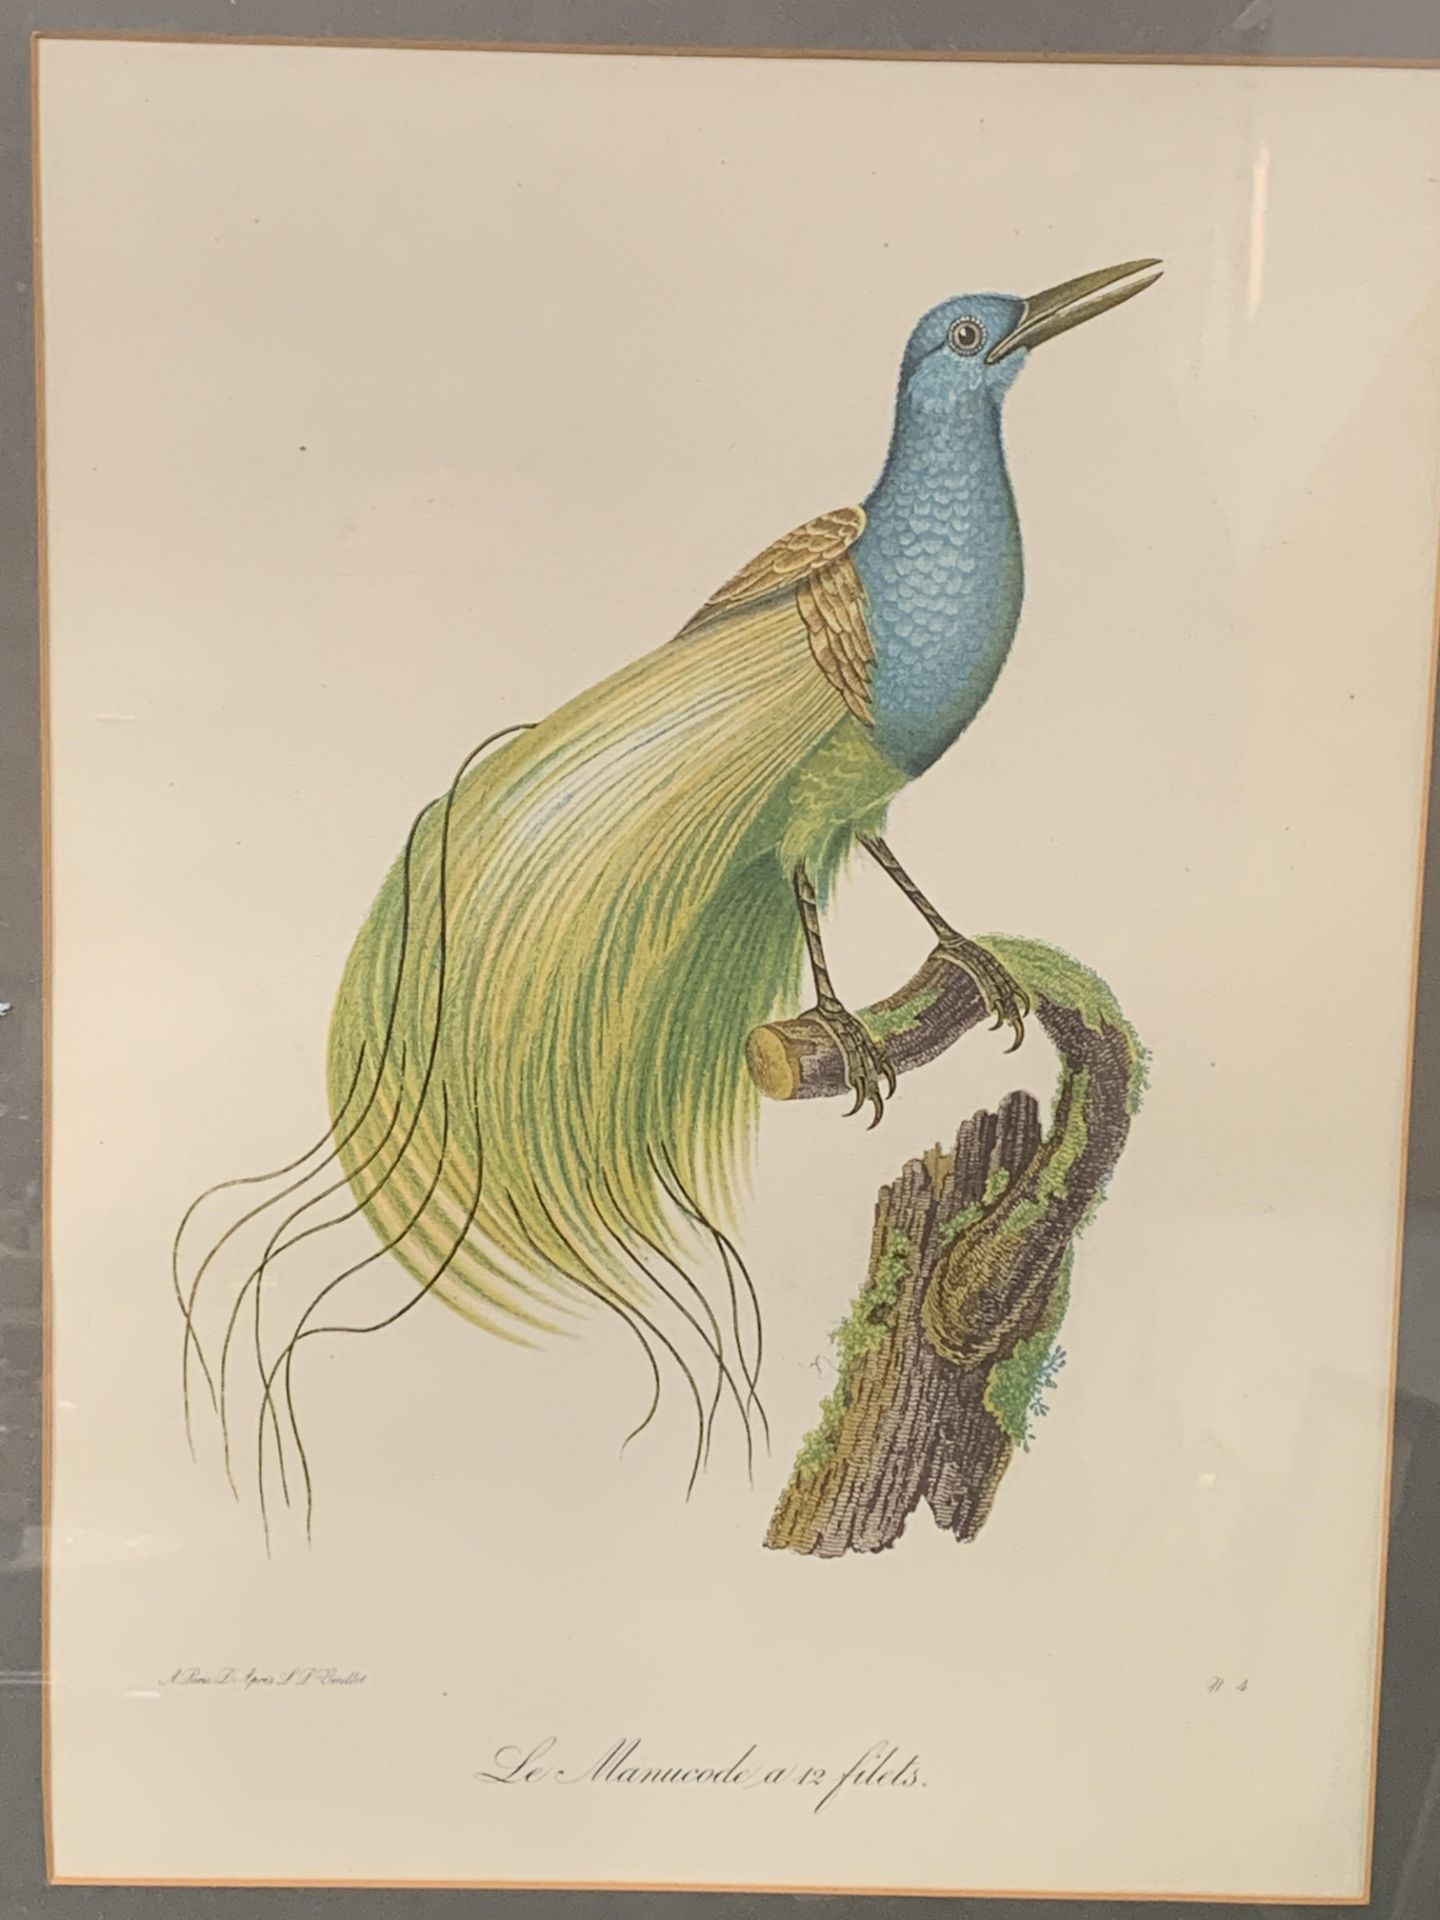 Framed and glazed print of an exotic bird